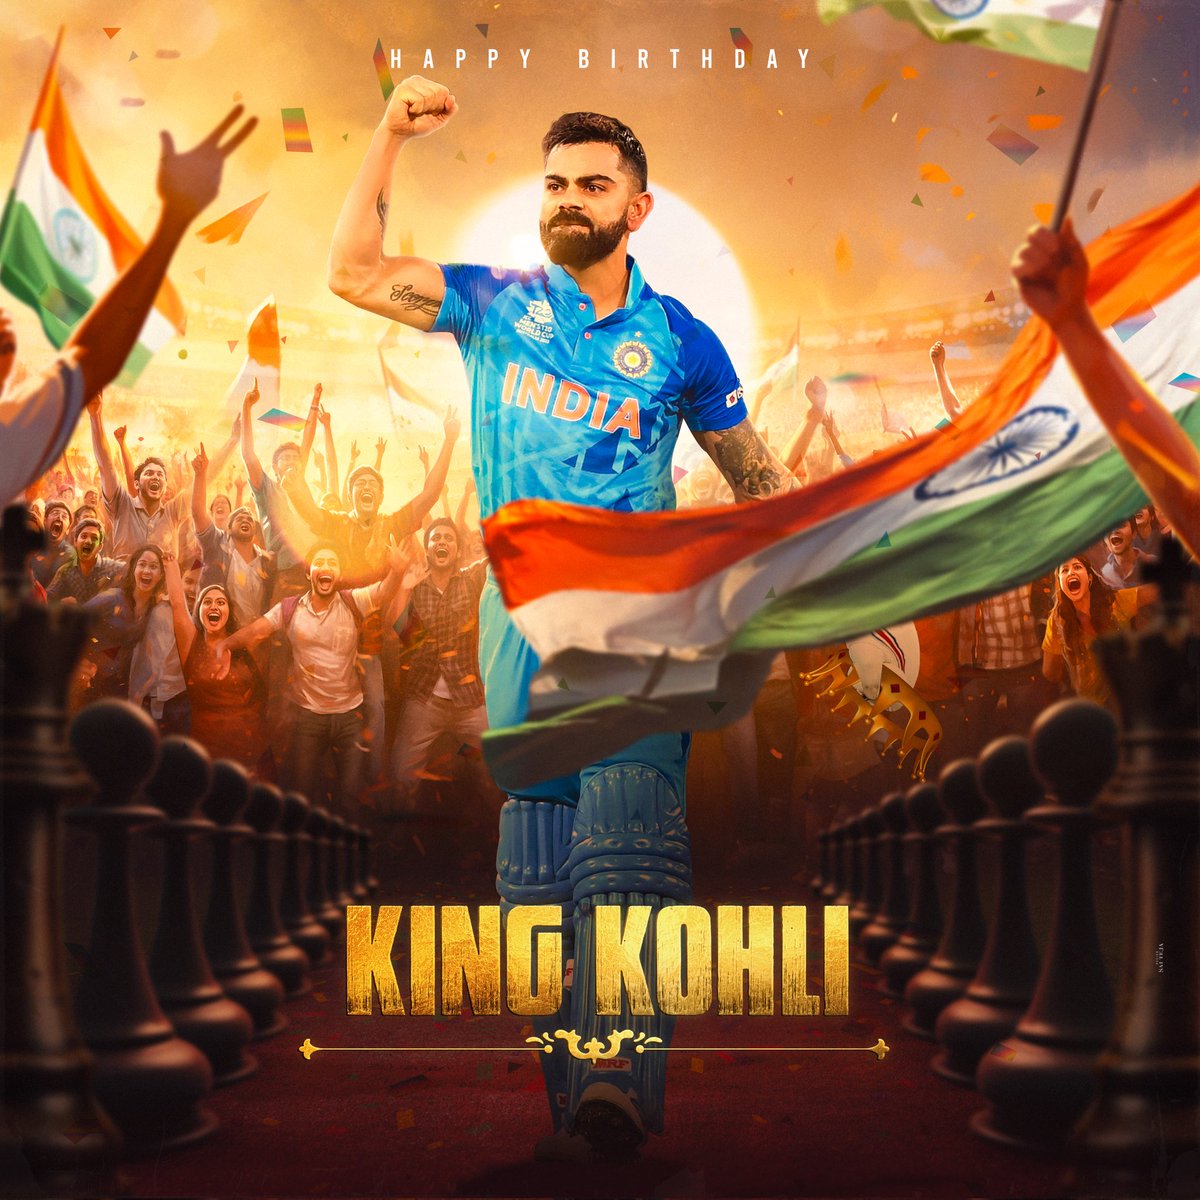 Here's The Common DP and Birthday Hastag To Celebrate Our Idol Virat Kohli Birthday ❤️

#HappyBirthdayKingKohli 

Change Your DPs & Mention @imVkohli in All Your Tweets 🔥